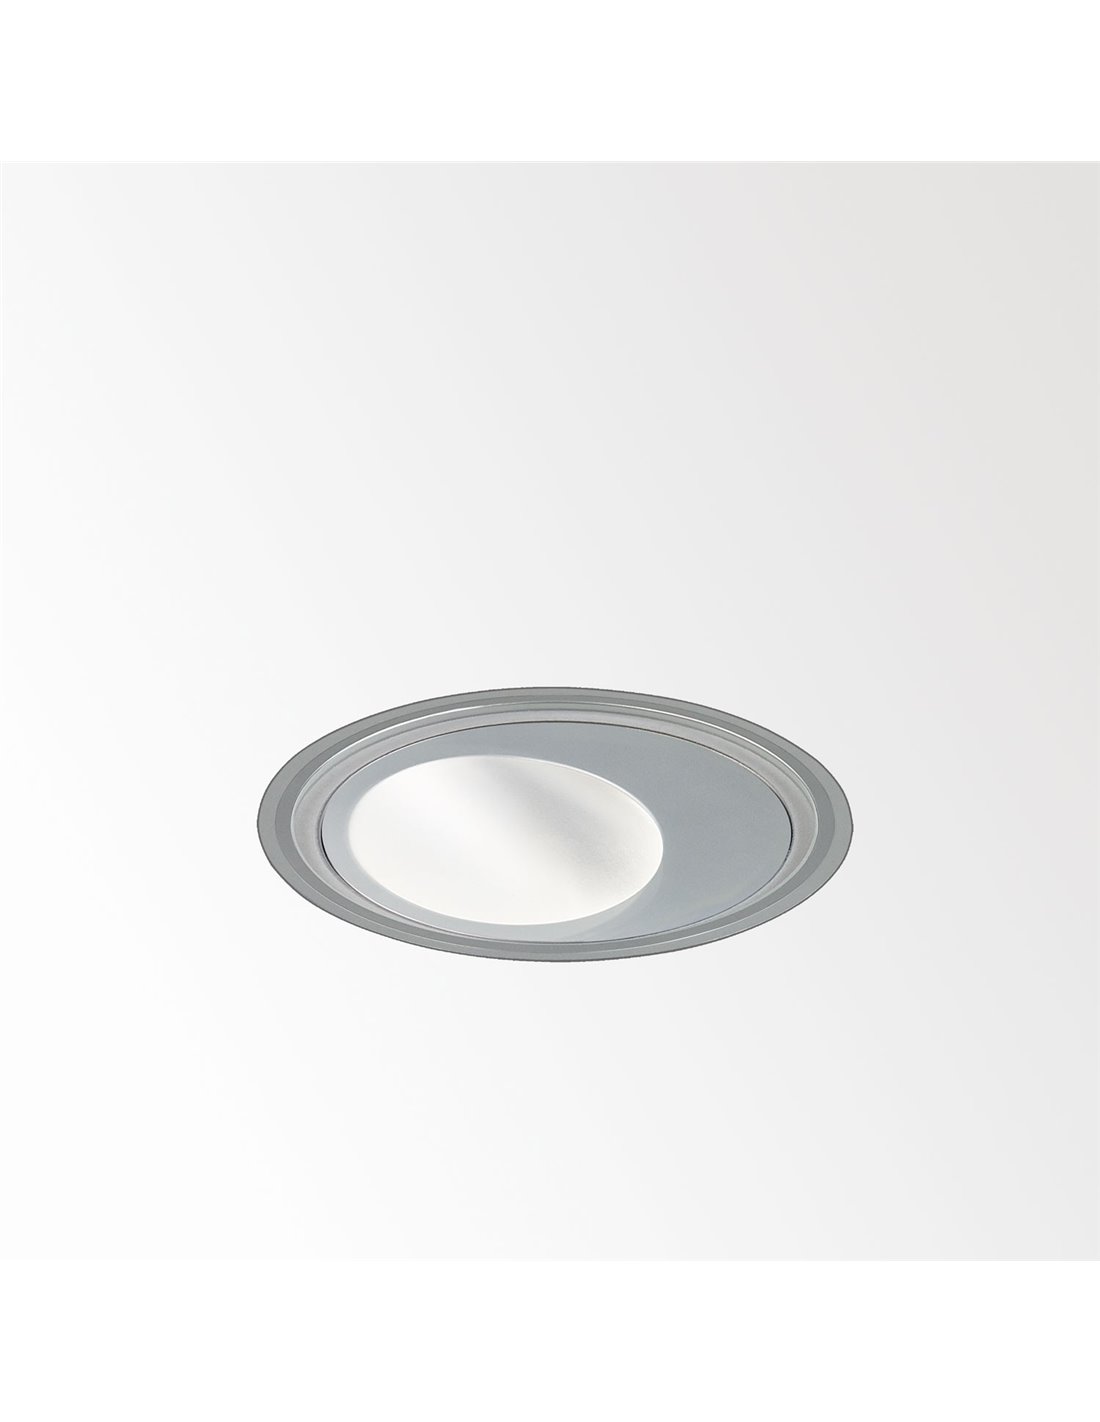 Buy Wever & Ducré PALOS ROUND OUTDOOR FLOOR SURFACE 1.0 LED online with  professional support.